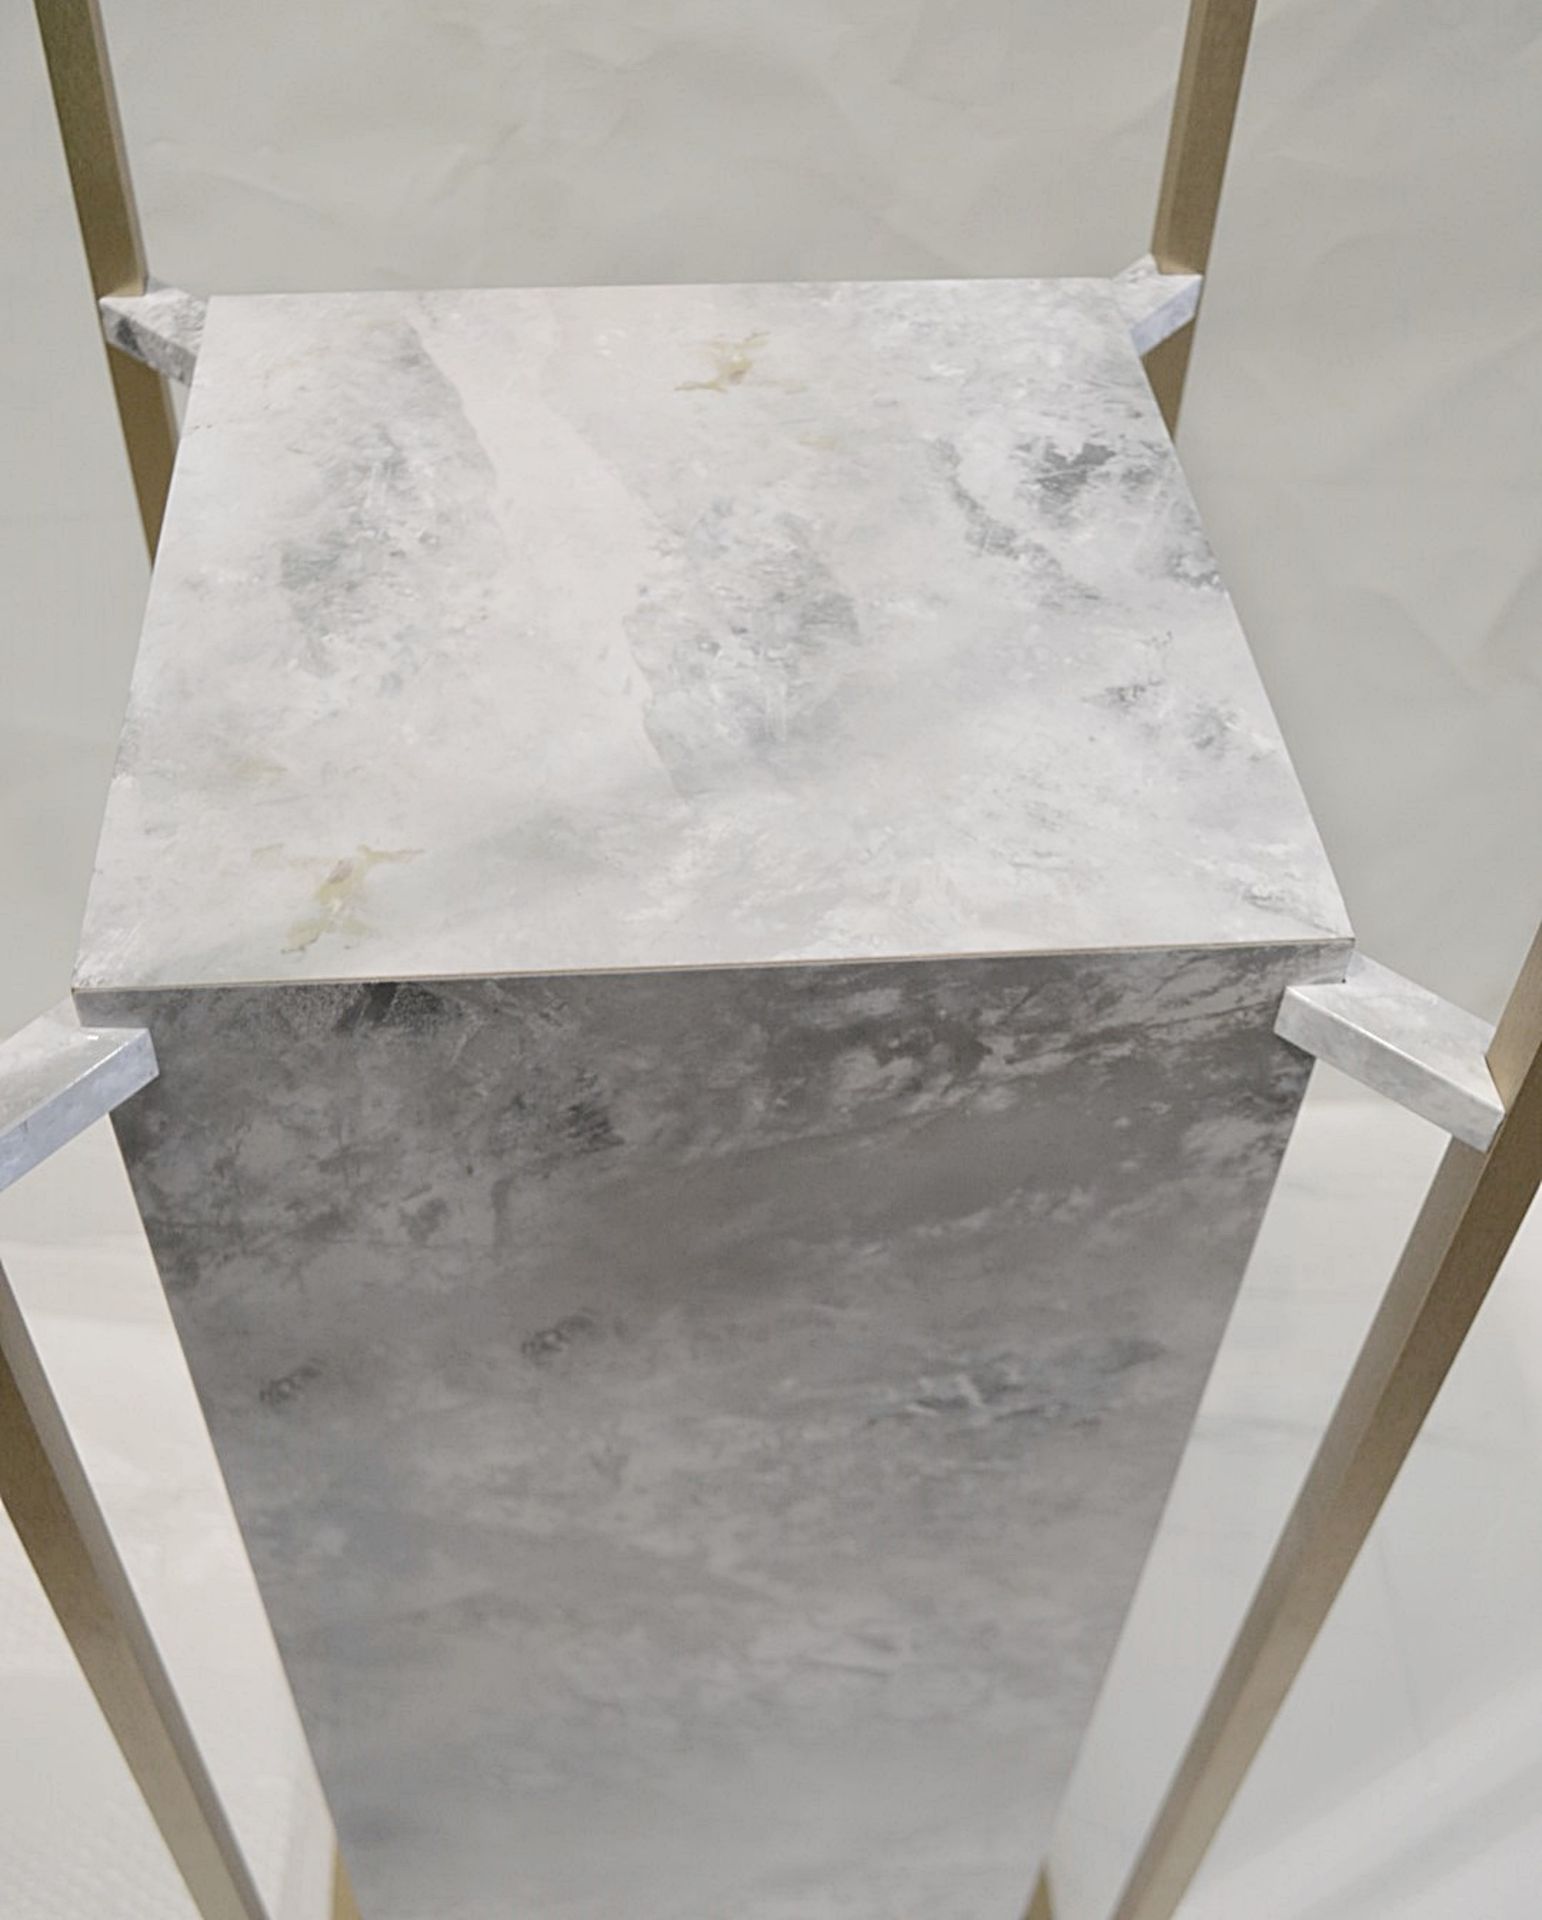 1 x 1.8 Metre Tall Freestanding Display Plinth With A Marble Effect Aestetic - Dimensions: H182 x - Image 3 of 4